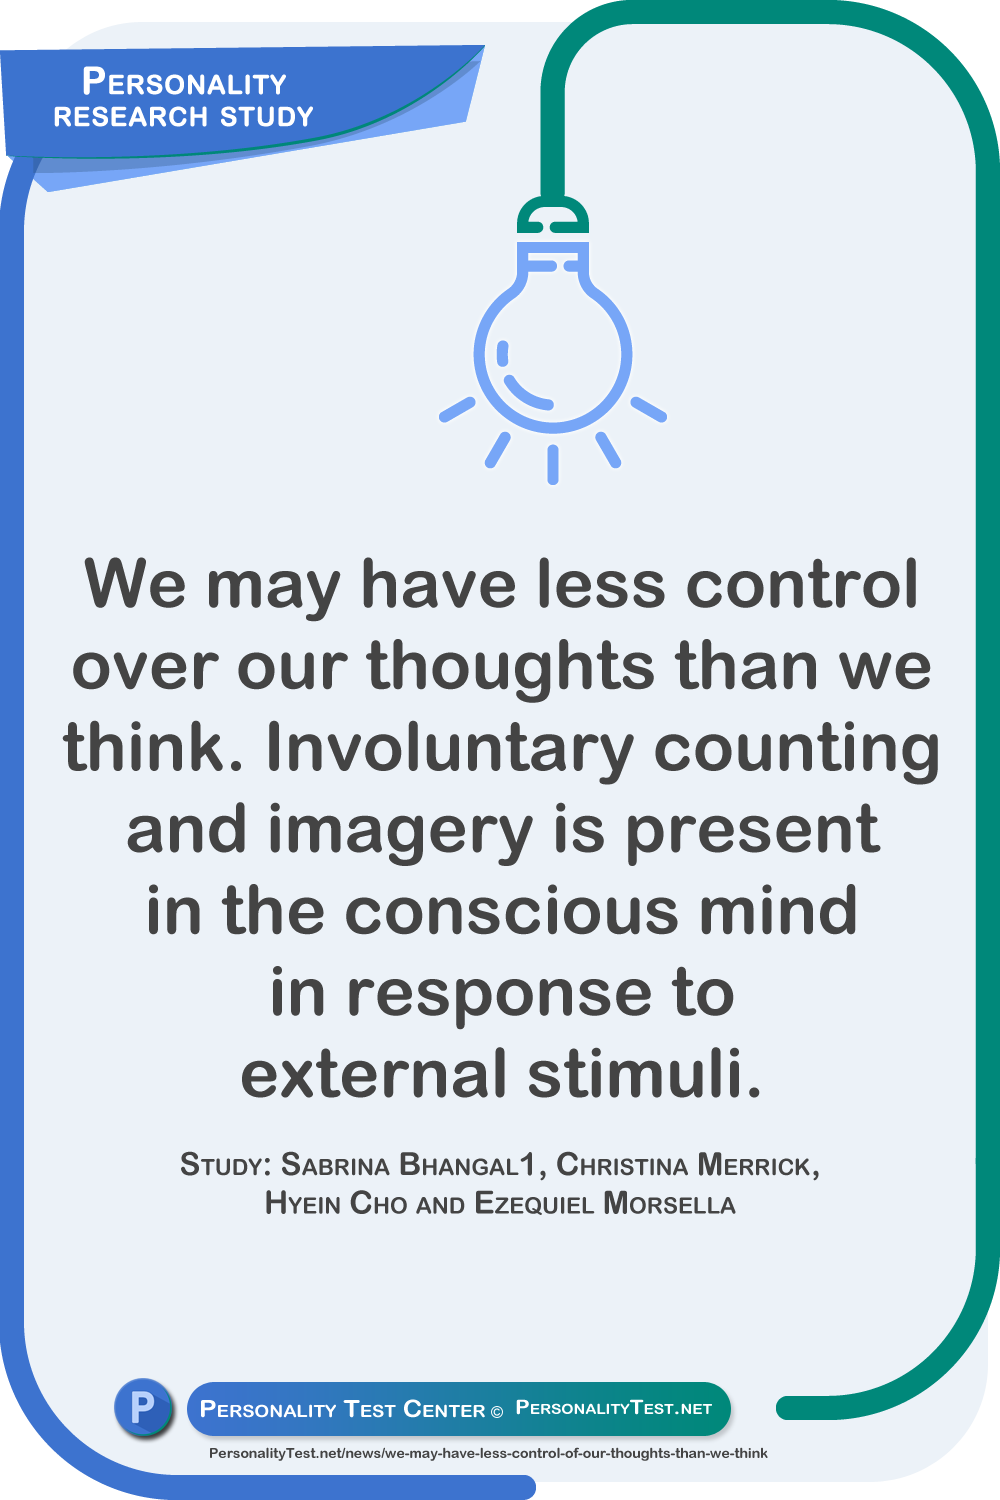 We may have less control of our thoughts than we think. Involuntary counting and imagery is present in the conscious mind in response to external stimuli. Study: Sabrina Bhangal1, Christina Merrick, Hyein Cho and Ezequiel Morsella